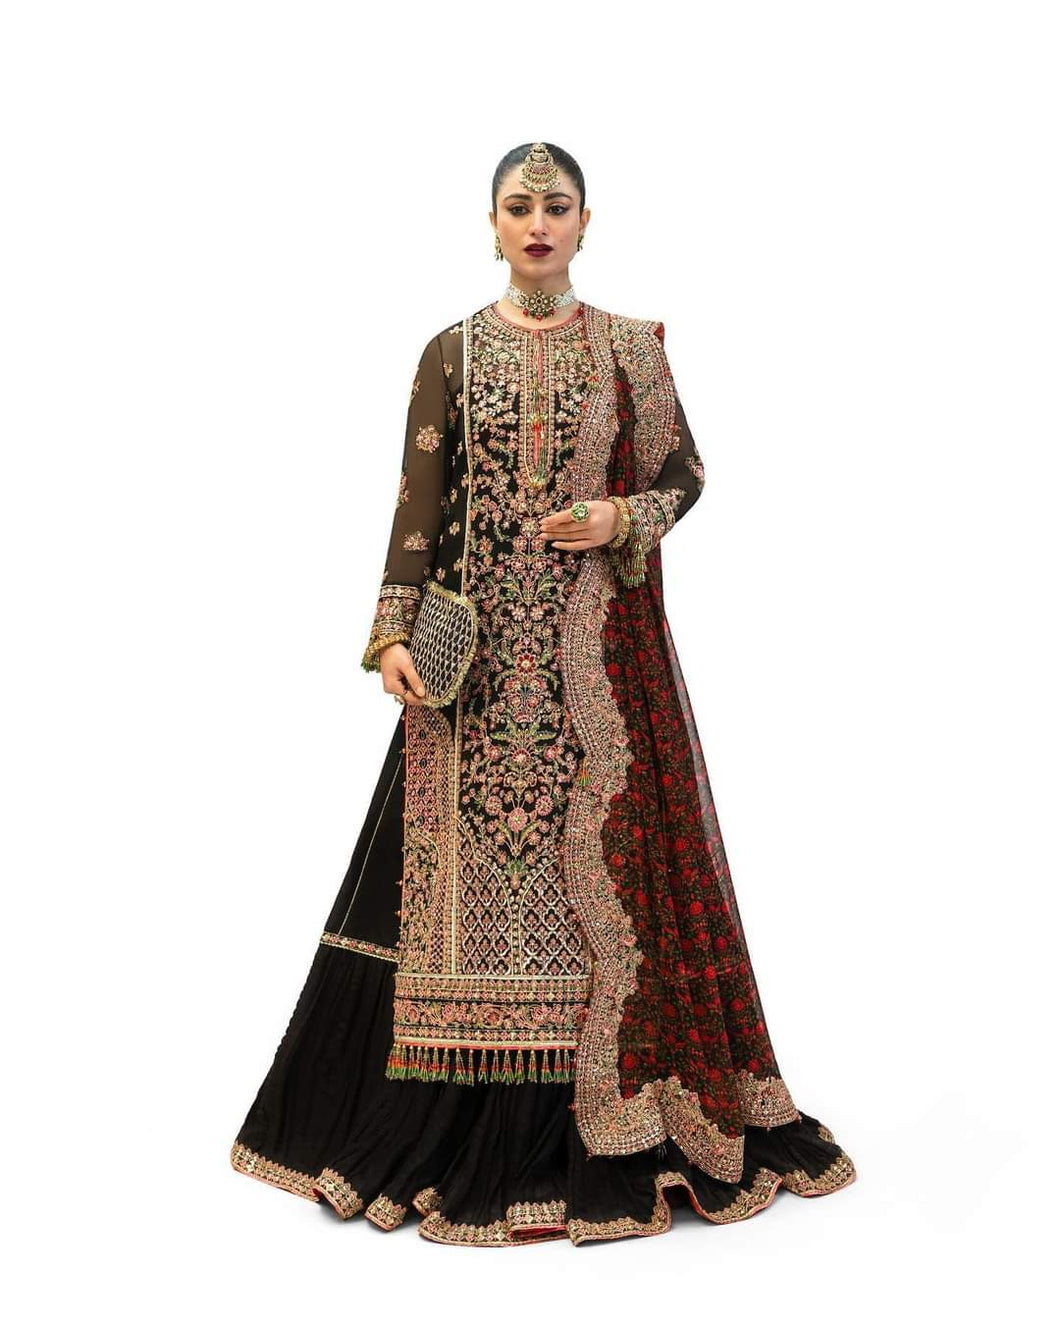 HUSSAIN REHAR | WEDDING FESTIVE COLLECTION 2023 | HAQEEQAT LEBAASONLINE Available on our website. We have exclusive variety of PAKISTANI DRESSES ONLINE. This wedding season get your unstitched or customized dresses from our PAKISTANI BOUTIQUE ONLINE. PAKISTANI DRESSES IN UK, USA,  Lebaasonline at SALE price!